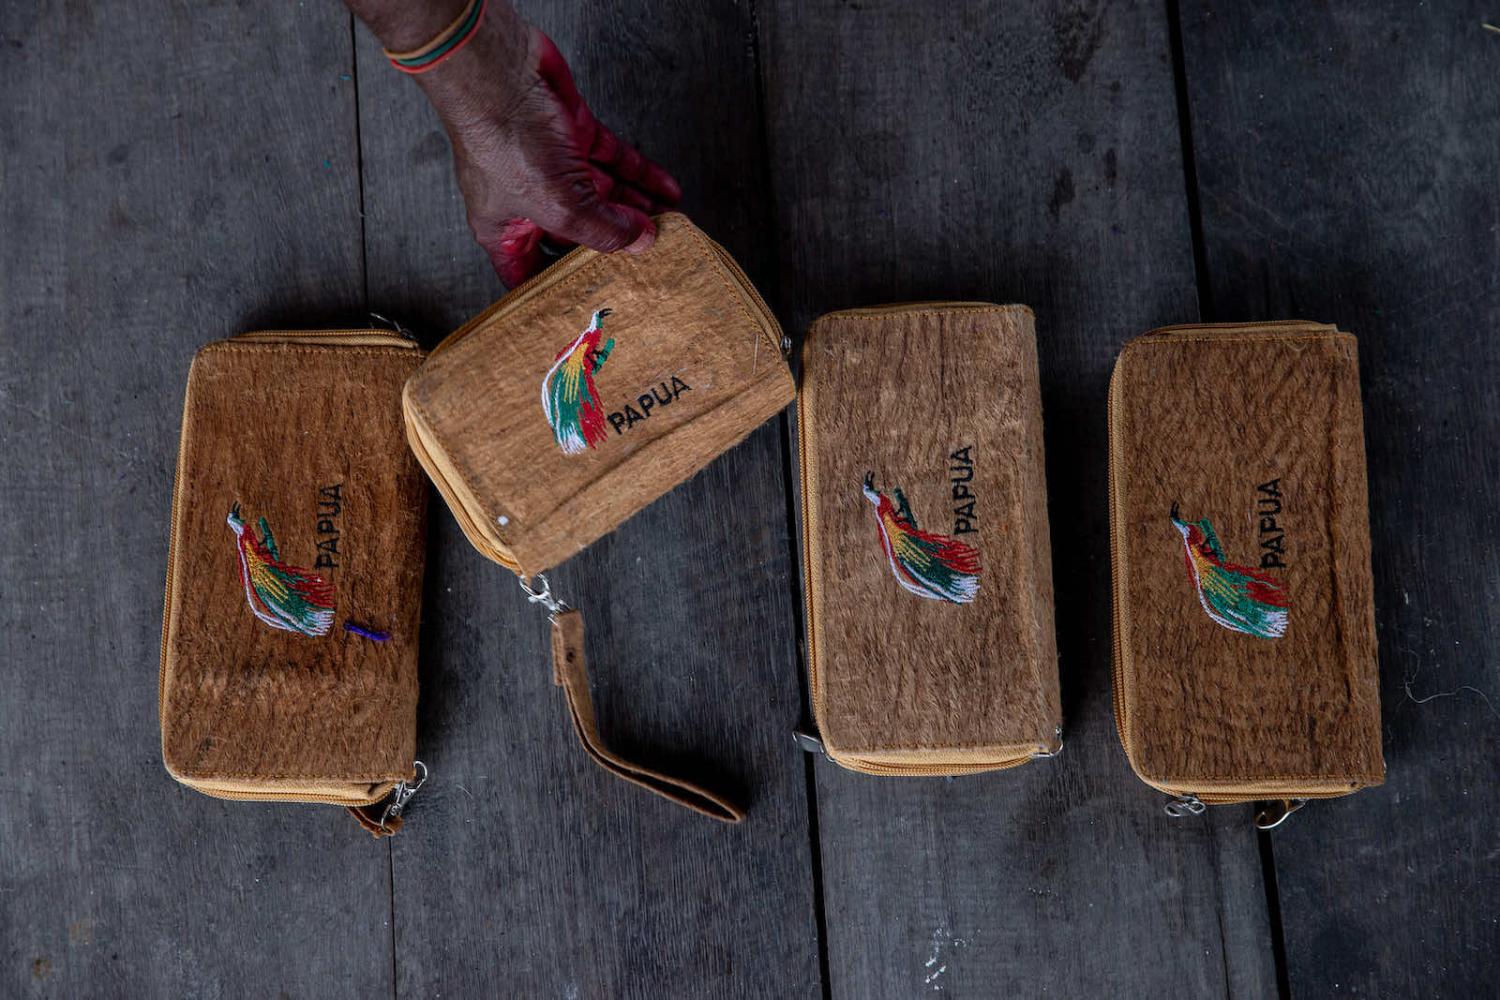 Bark painting wallets at Asei village in Jayapura, a modern adaptation of a traditional craft in the area dating back to at least the 1600s (Robertus Pudyanto/Getty Images)